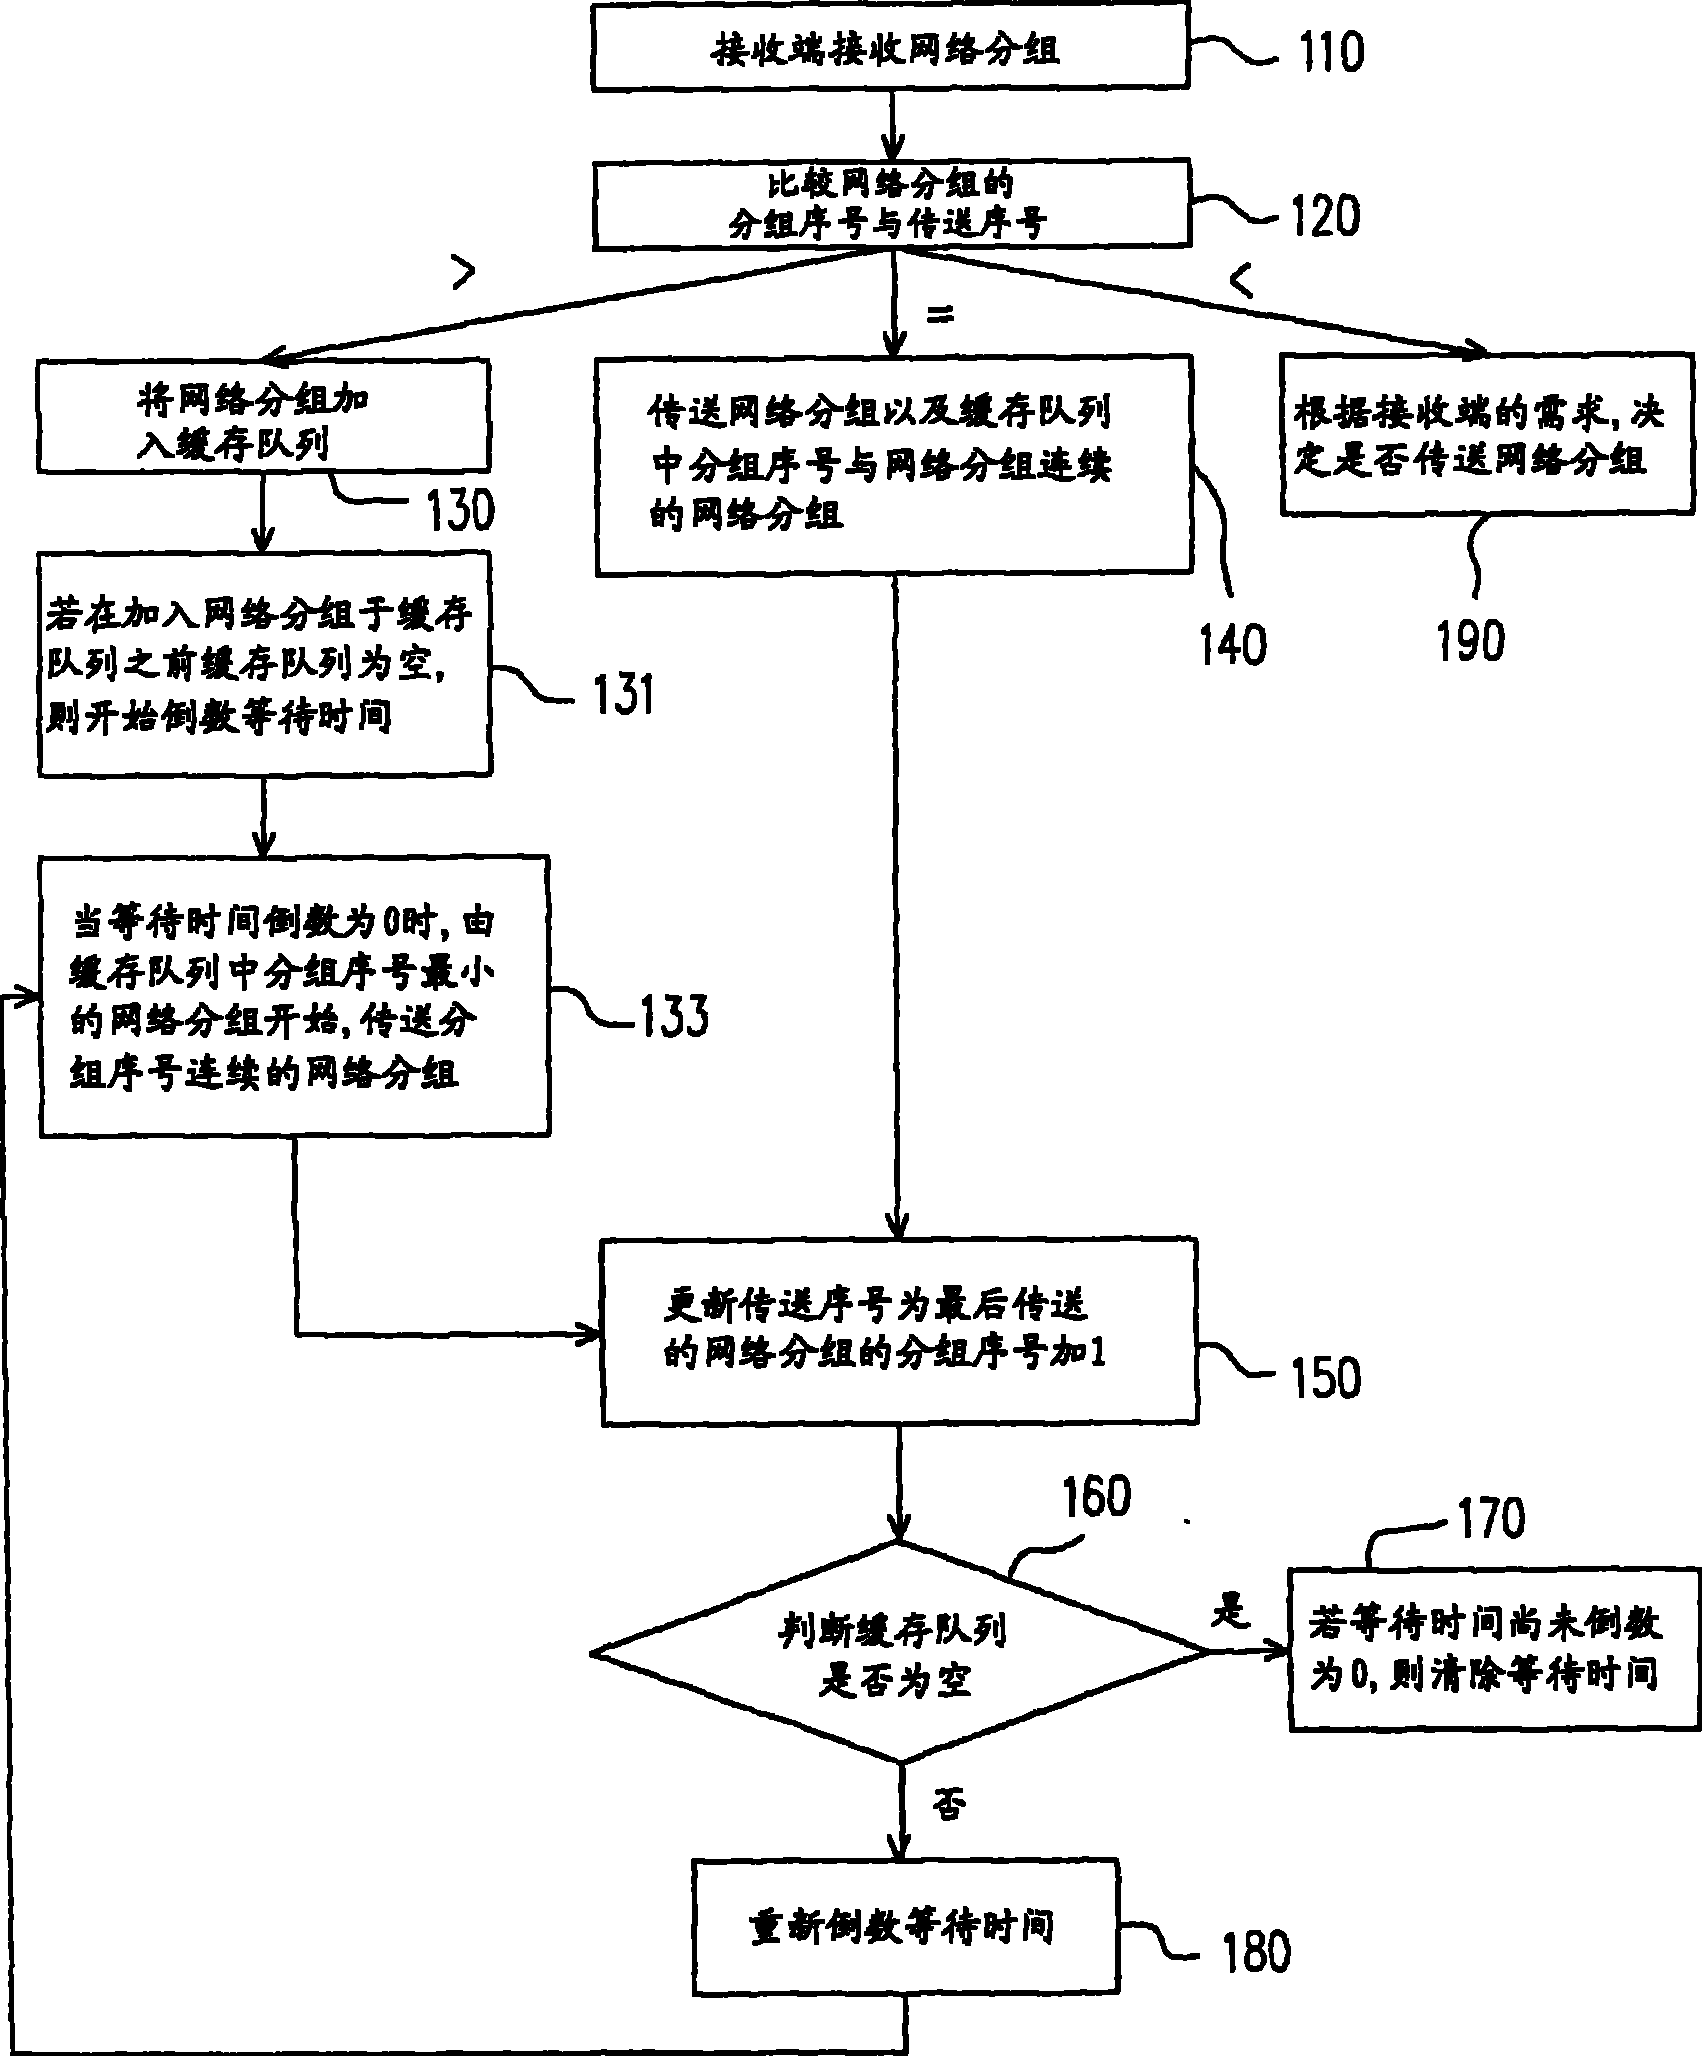 Network packet conveying method